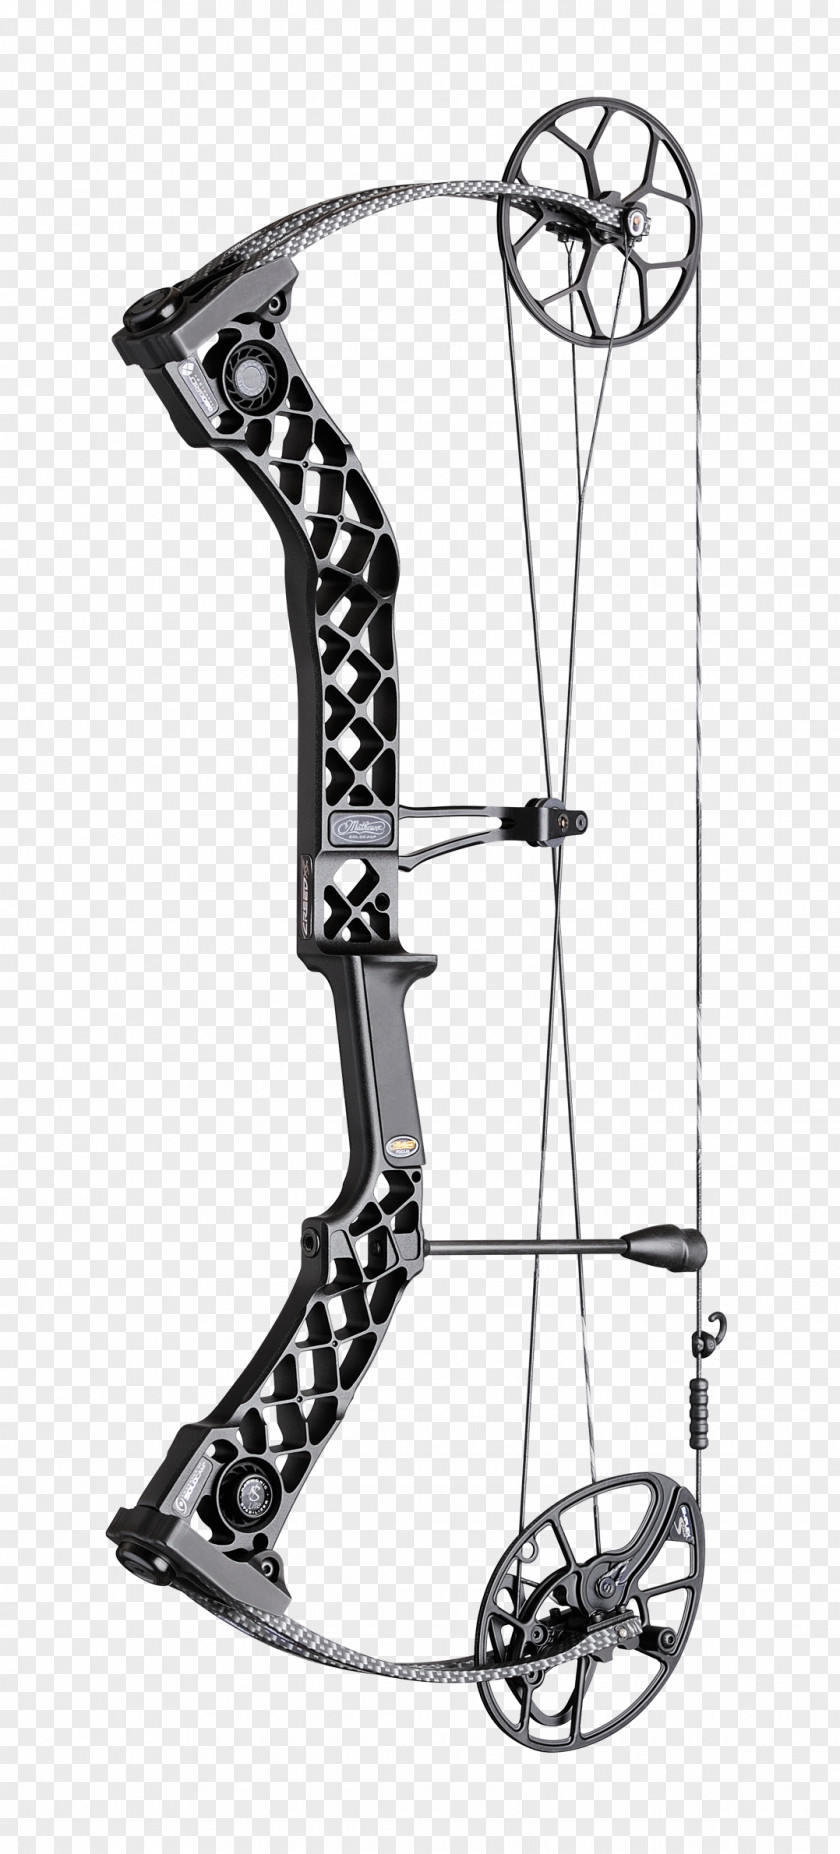 Cross Bows And Arrows Bow Arrow Compound Archery Bowhunting PNG